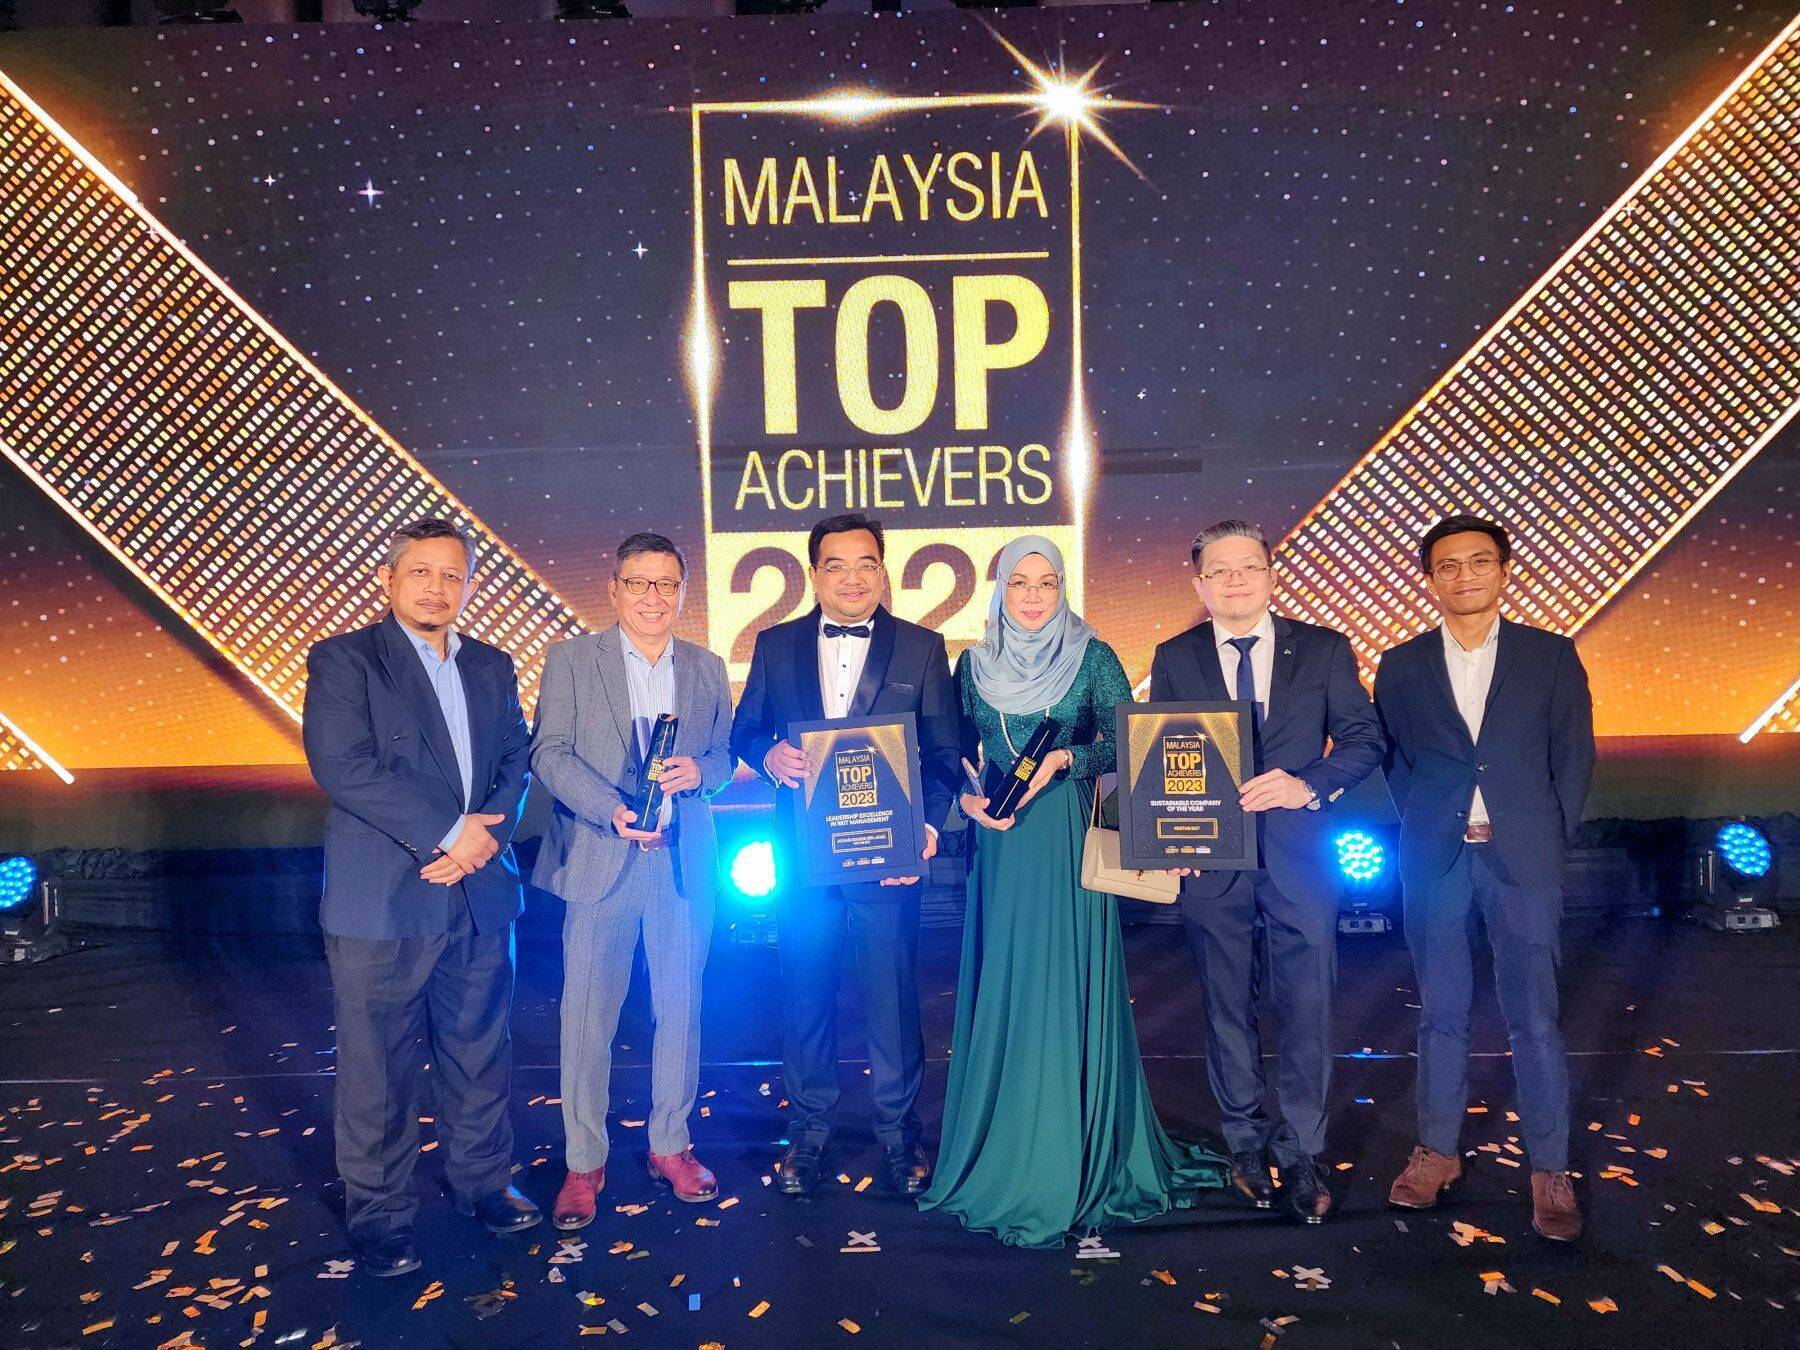 HEKTAR REIT Receives Two Inaugural Honors at Malaysia Top Achievers 2023 Award